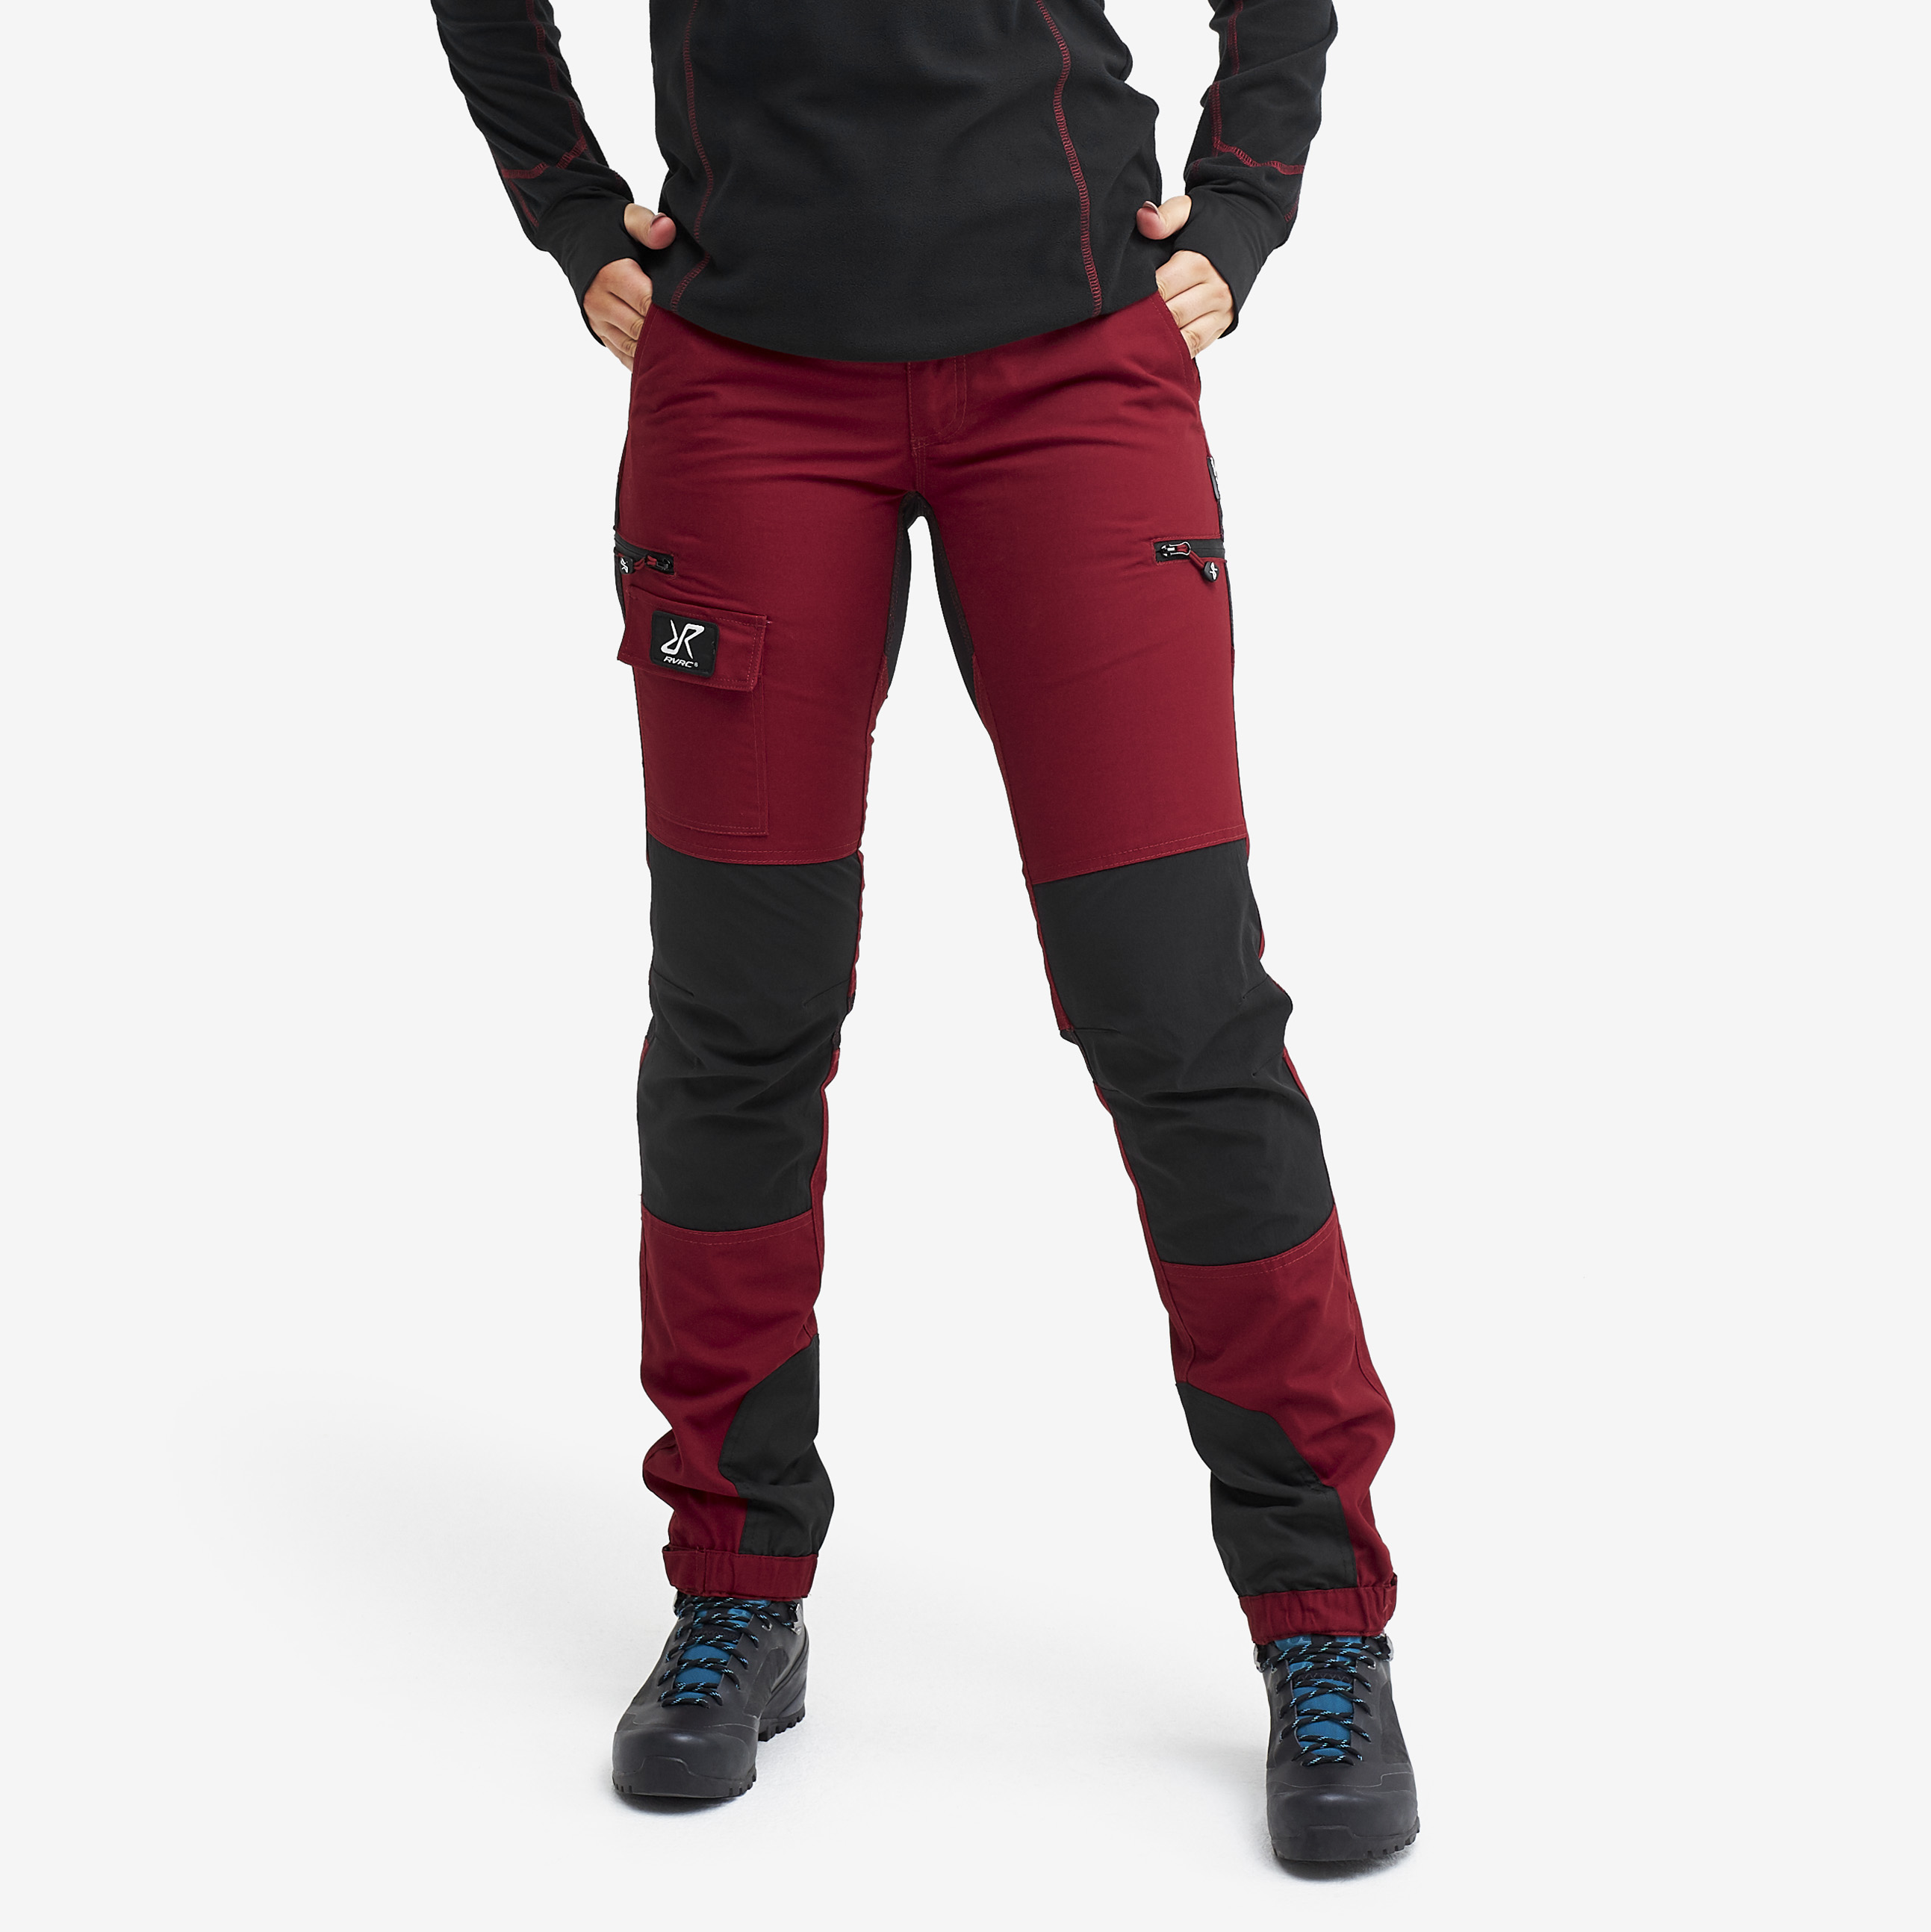 Nordwand Pants Wine Red Mujeres